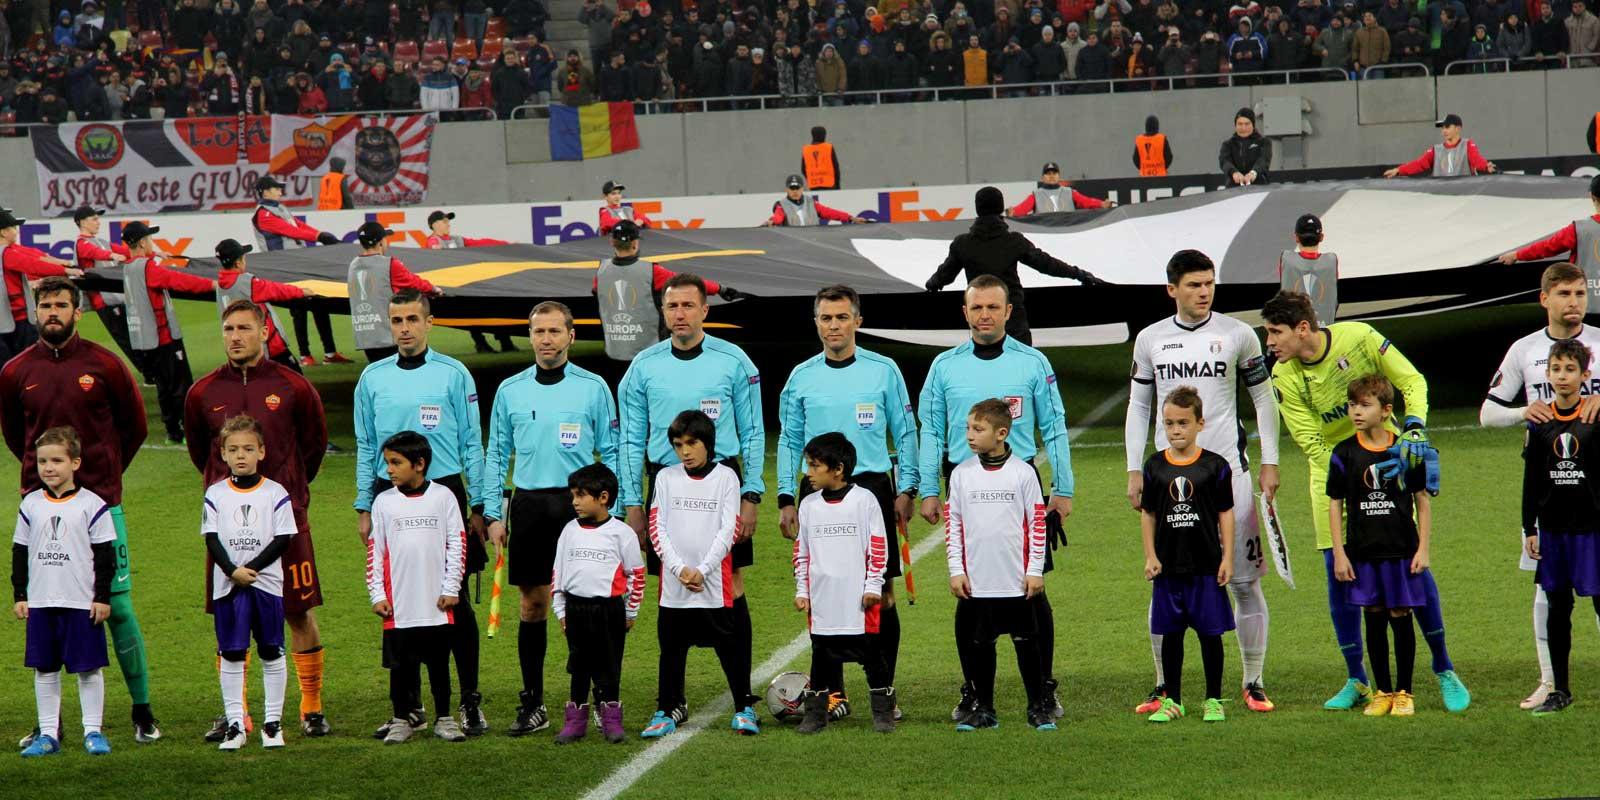 Children and players in Romanian football stadium